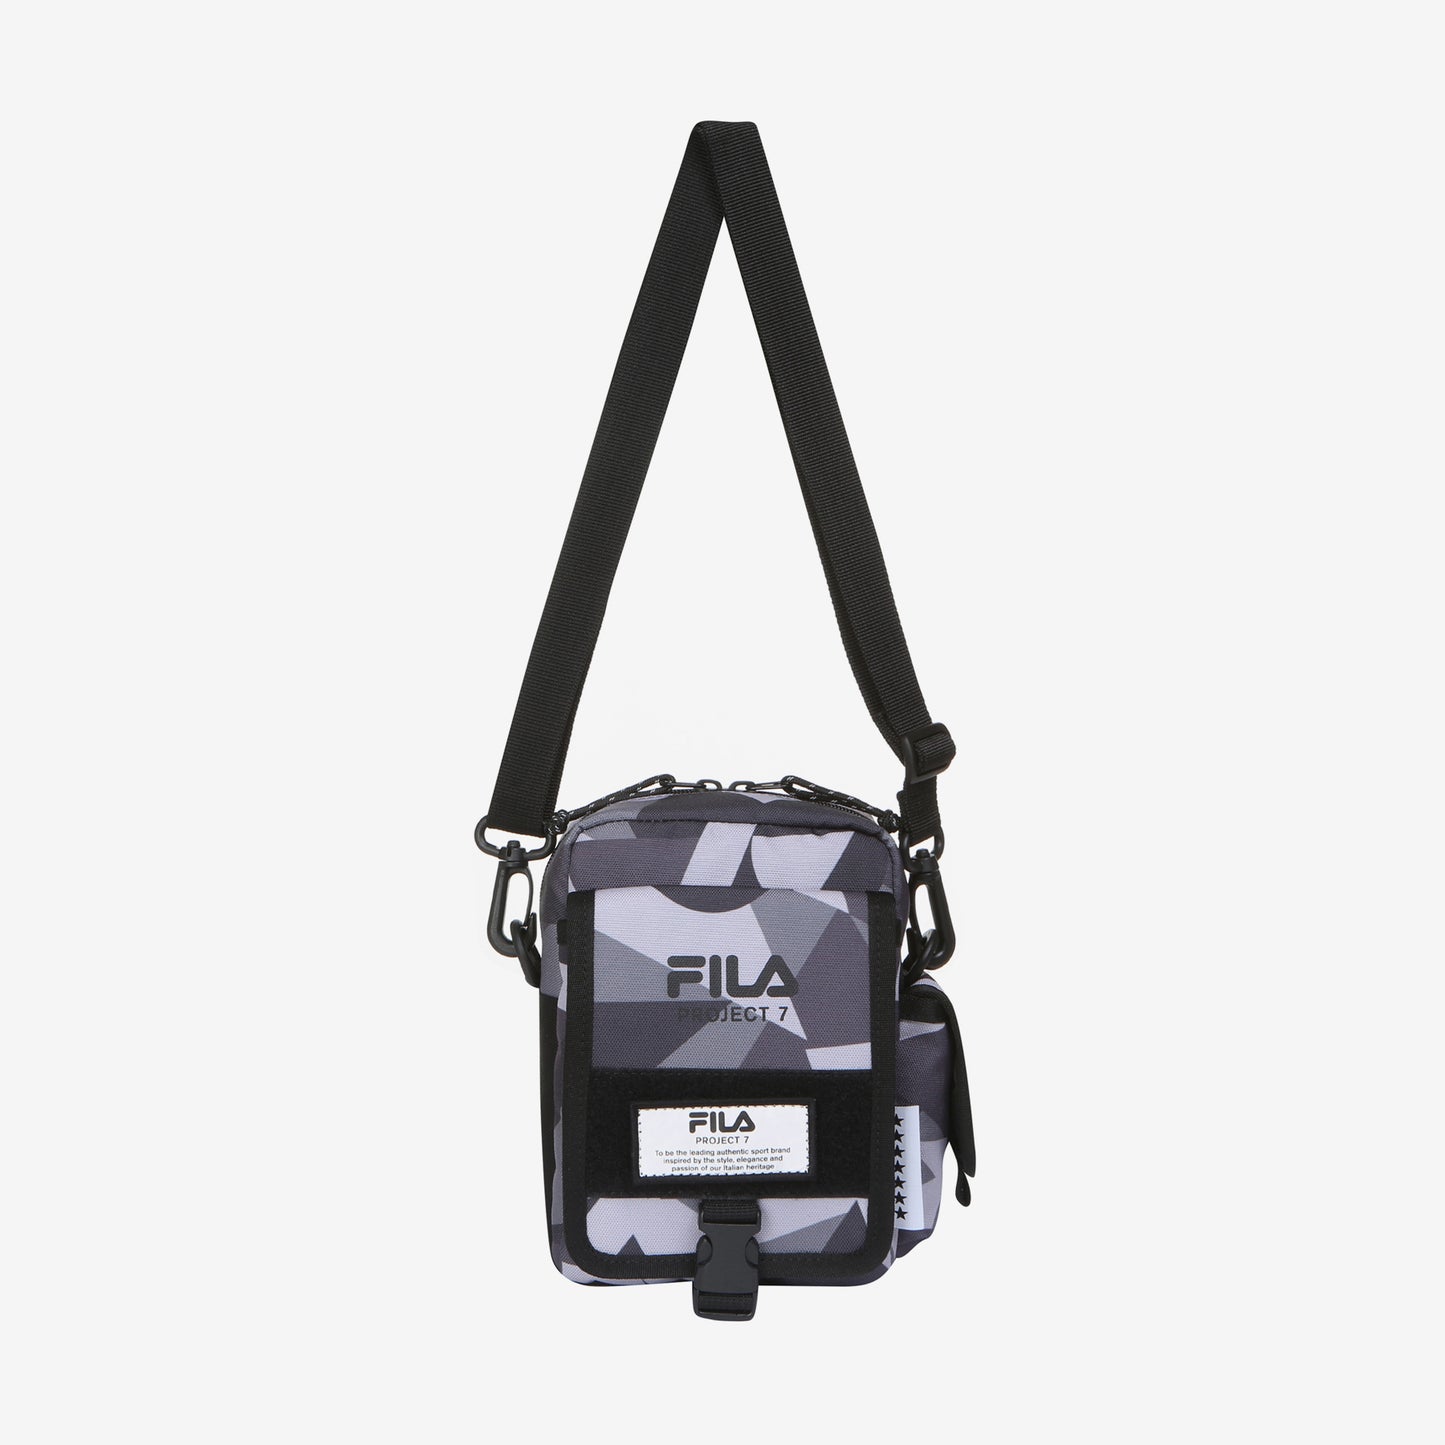 FILA Project 7 Mini Bag (2 color) - YOUAREMYPOISON